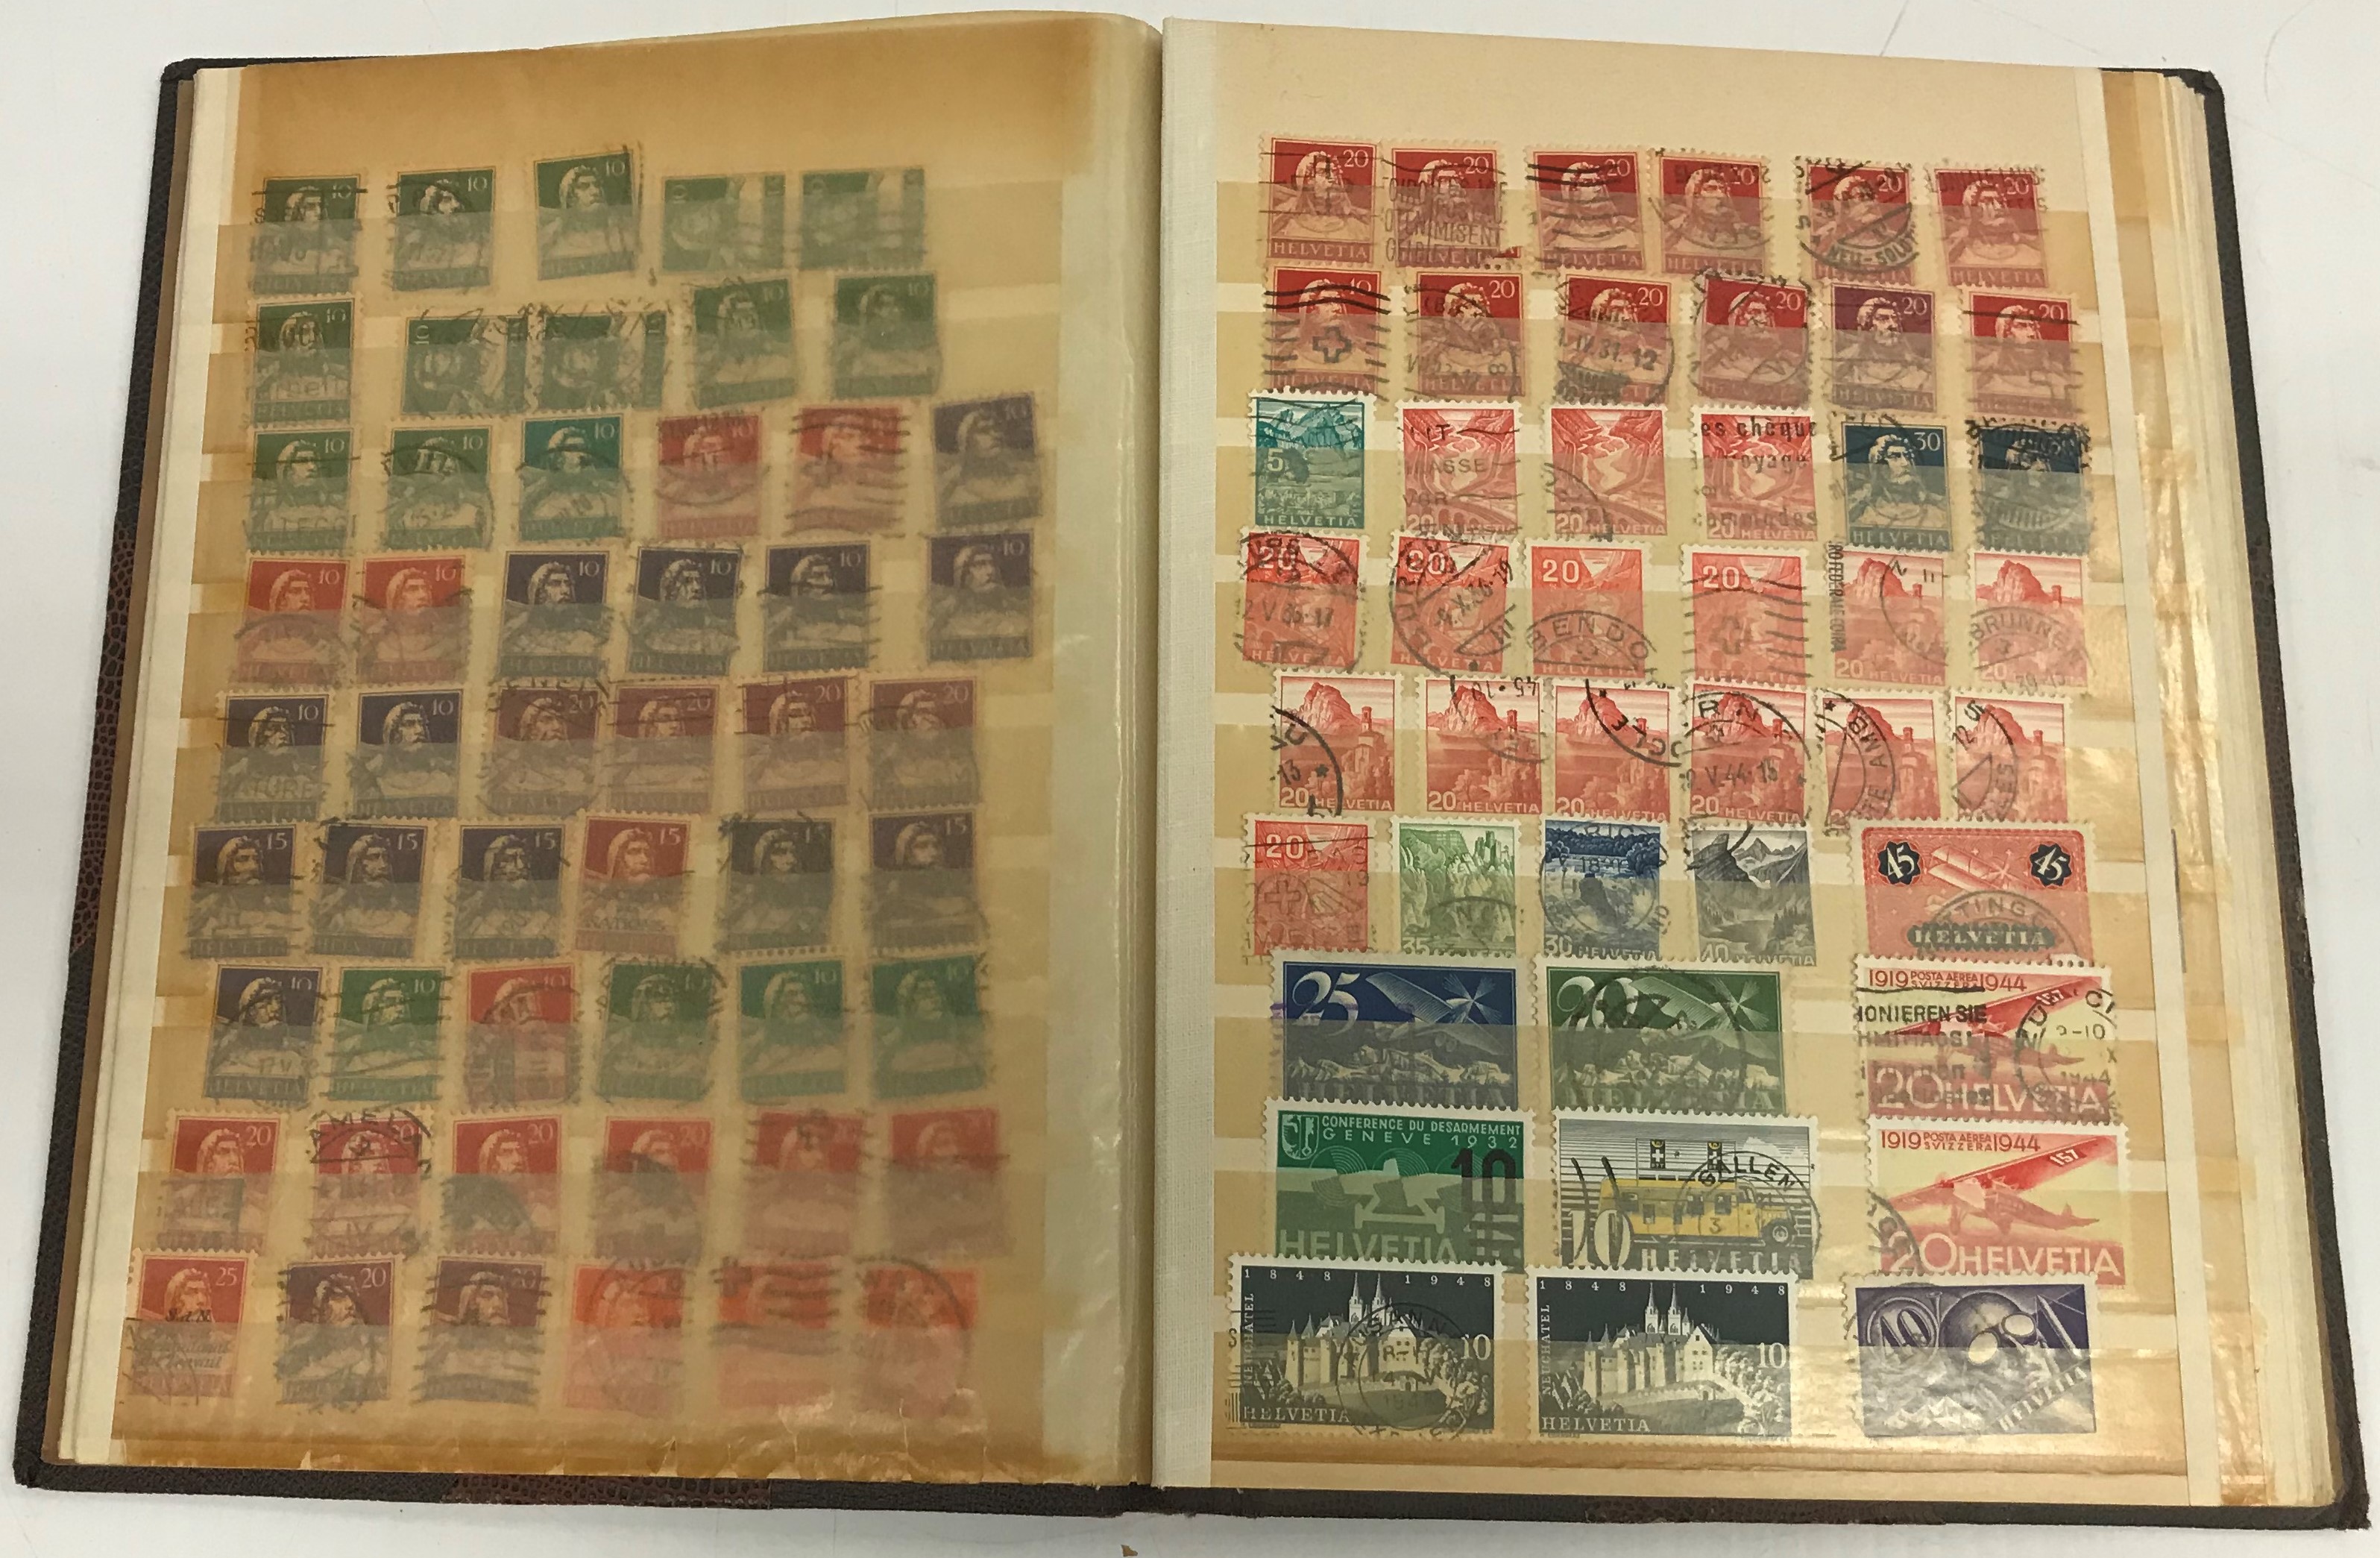 26 various albums of British and World stamps, together with three shoe boxes of various un-